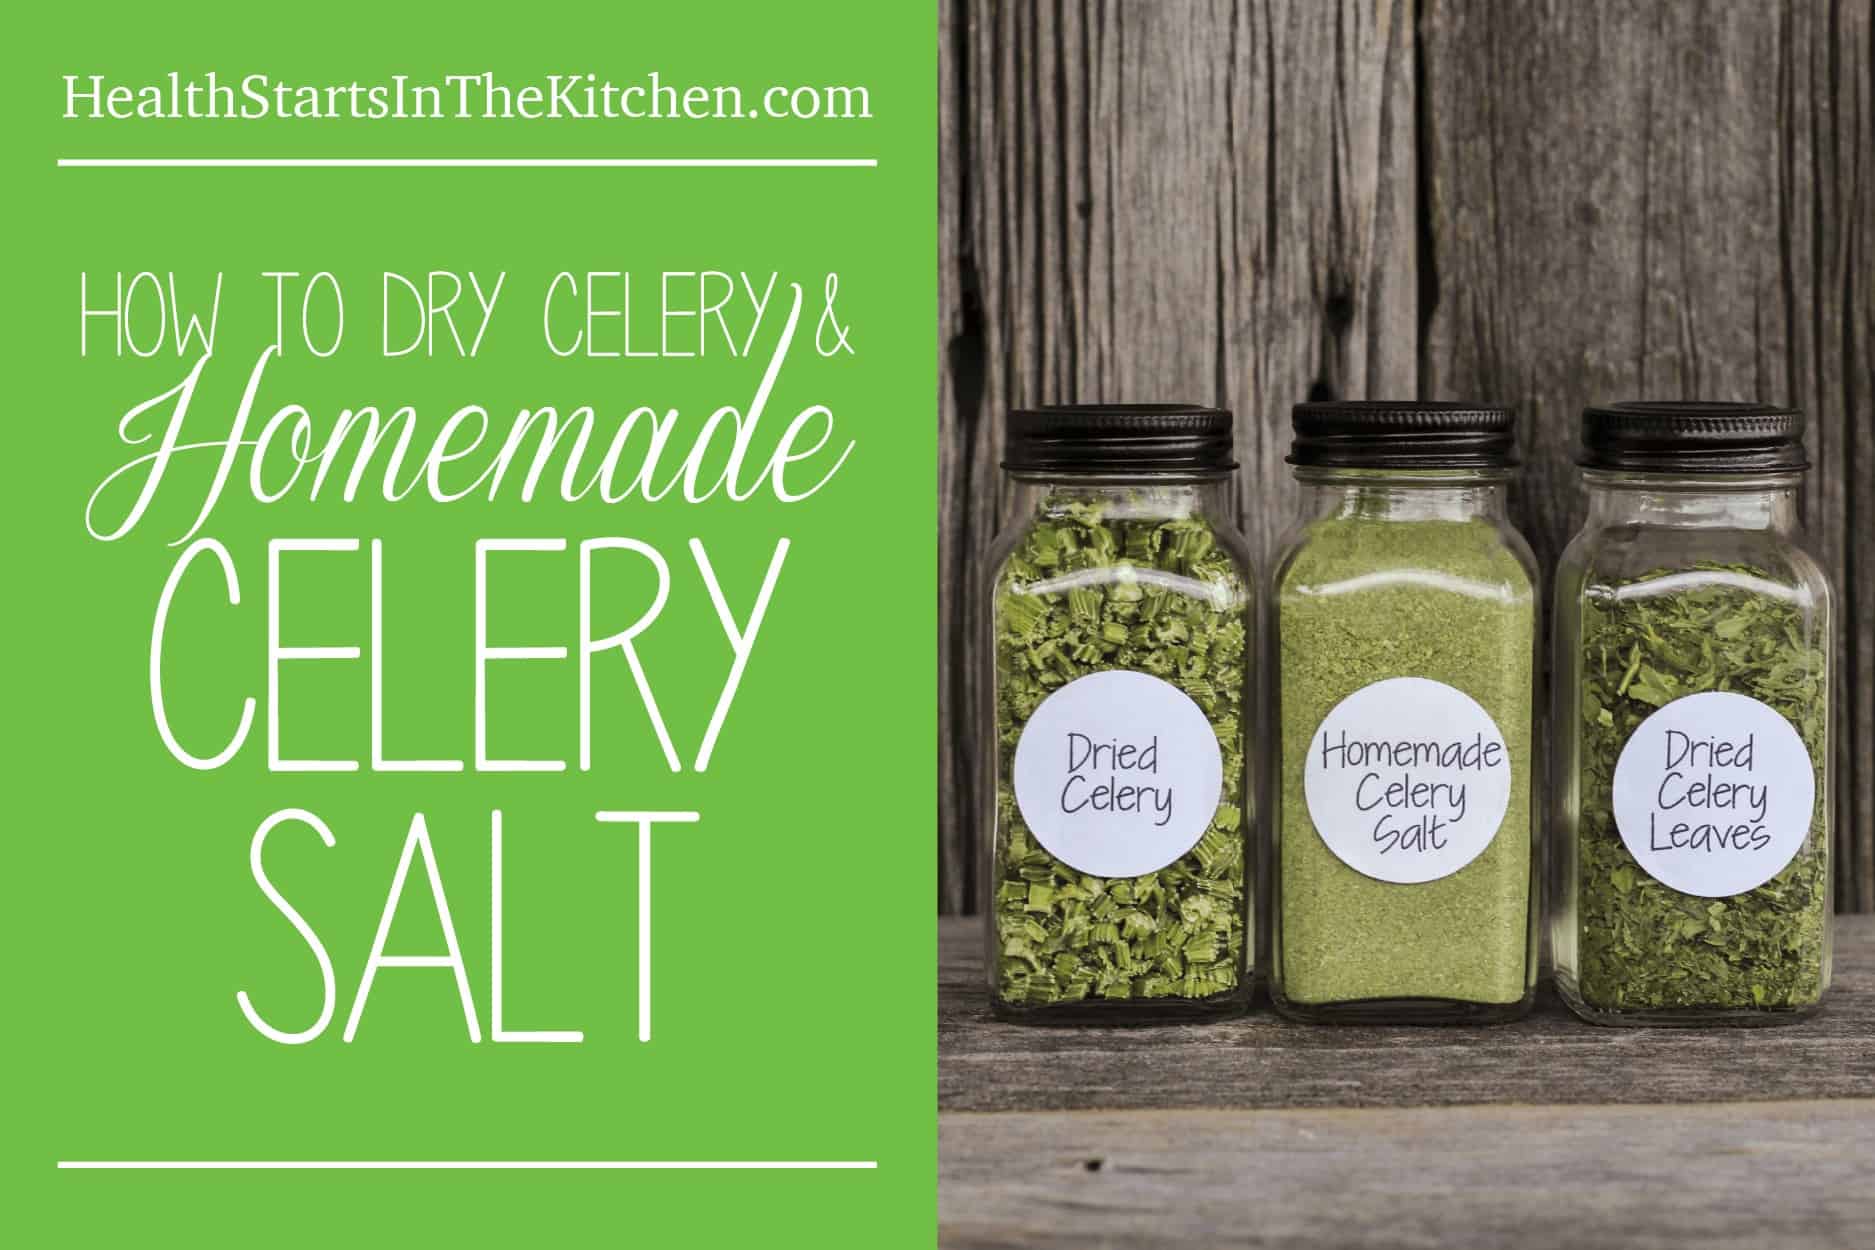 Homemade Celery Salt Recipe and How To Dry Celery and Celery Leaves